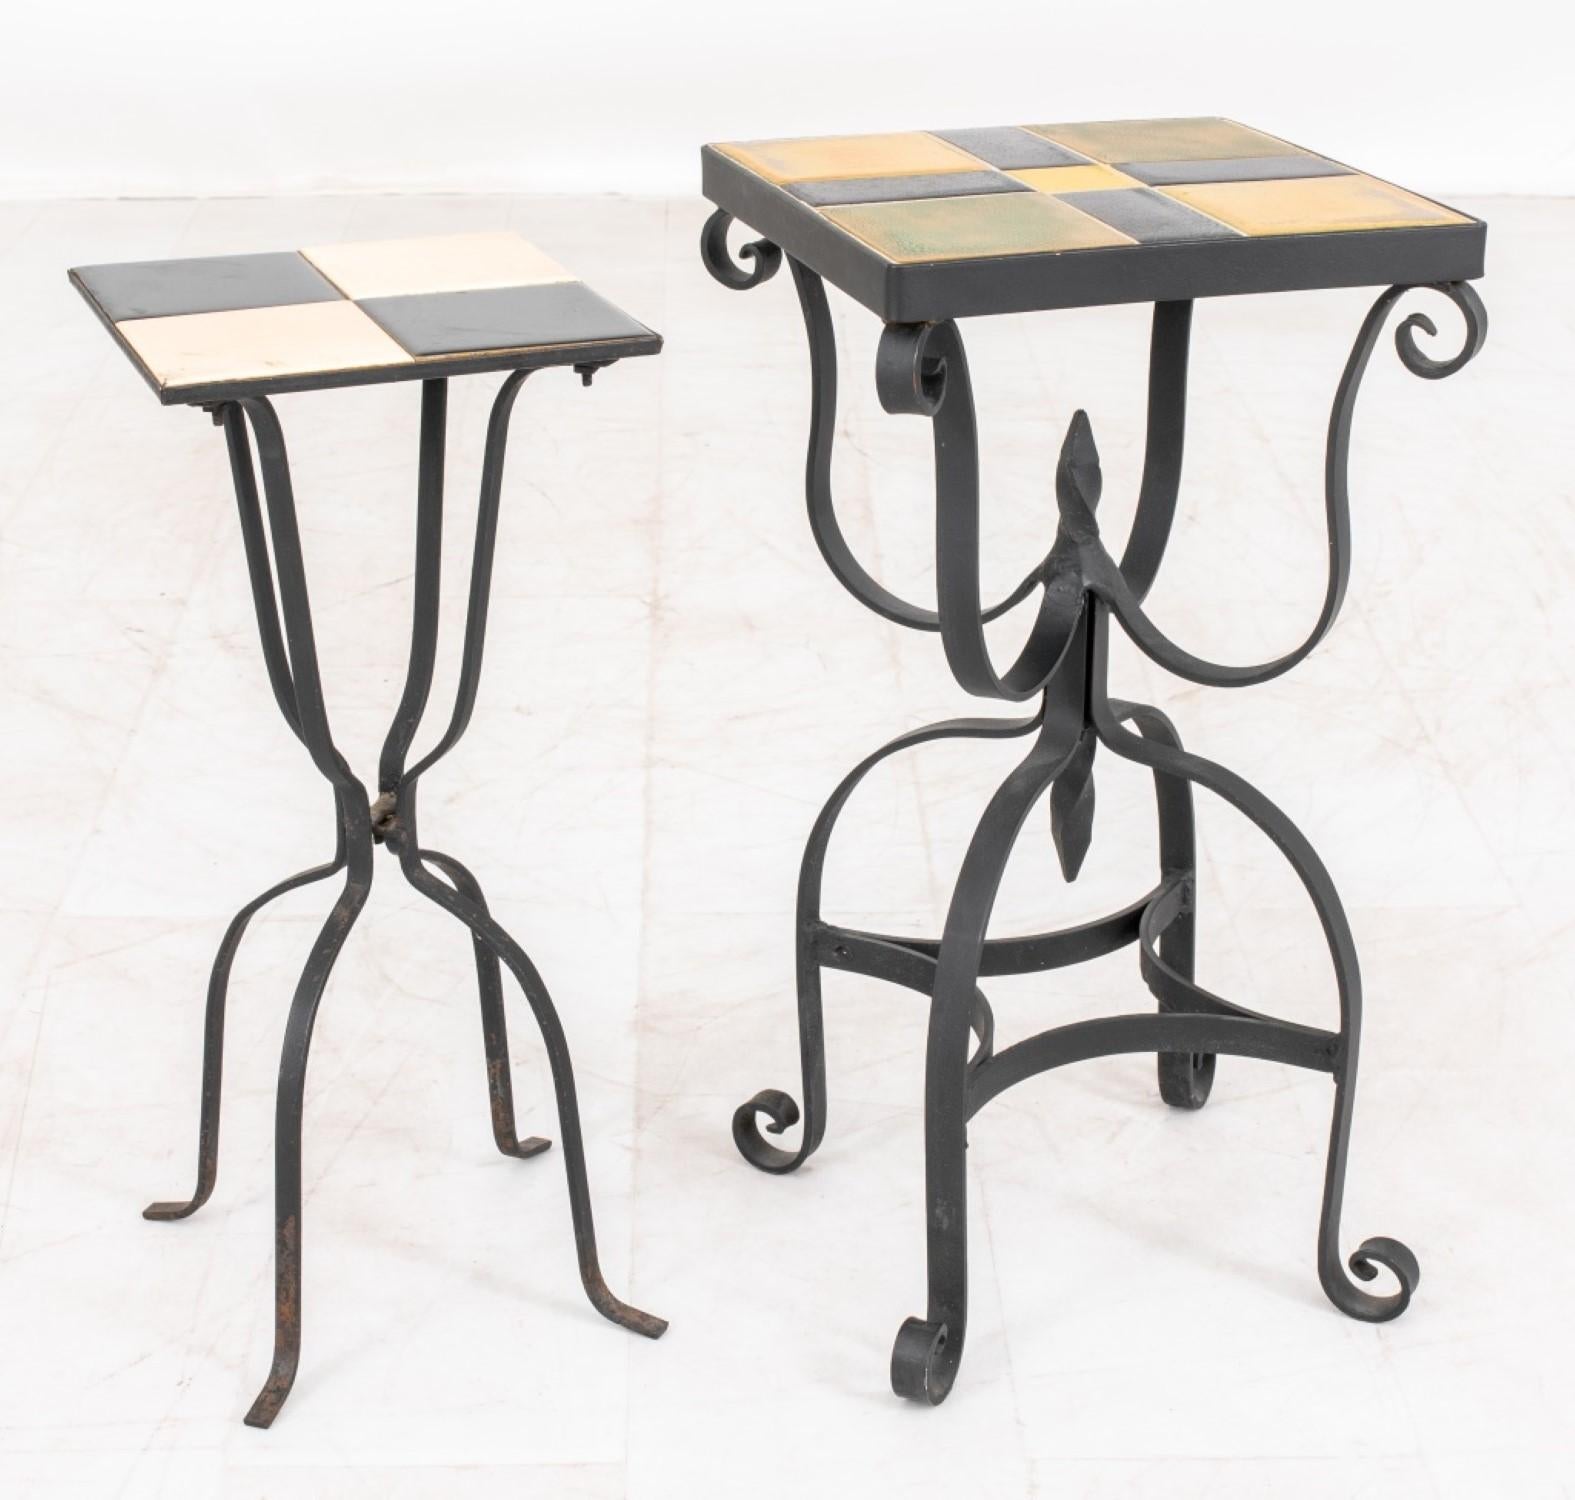 Ceramic Tile Top Iron Side Tables, 2 For Sale 2